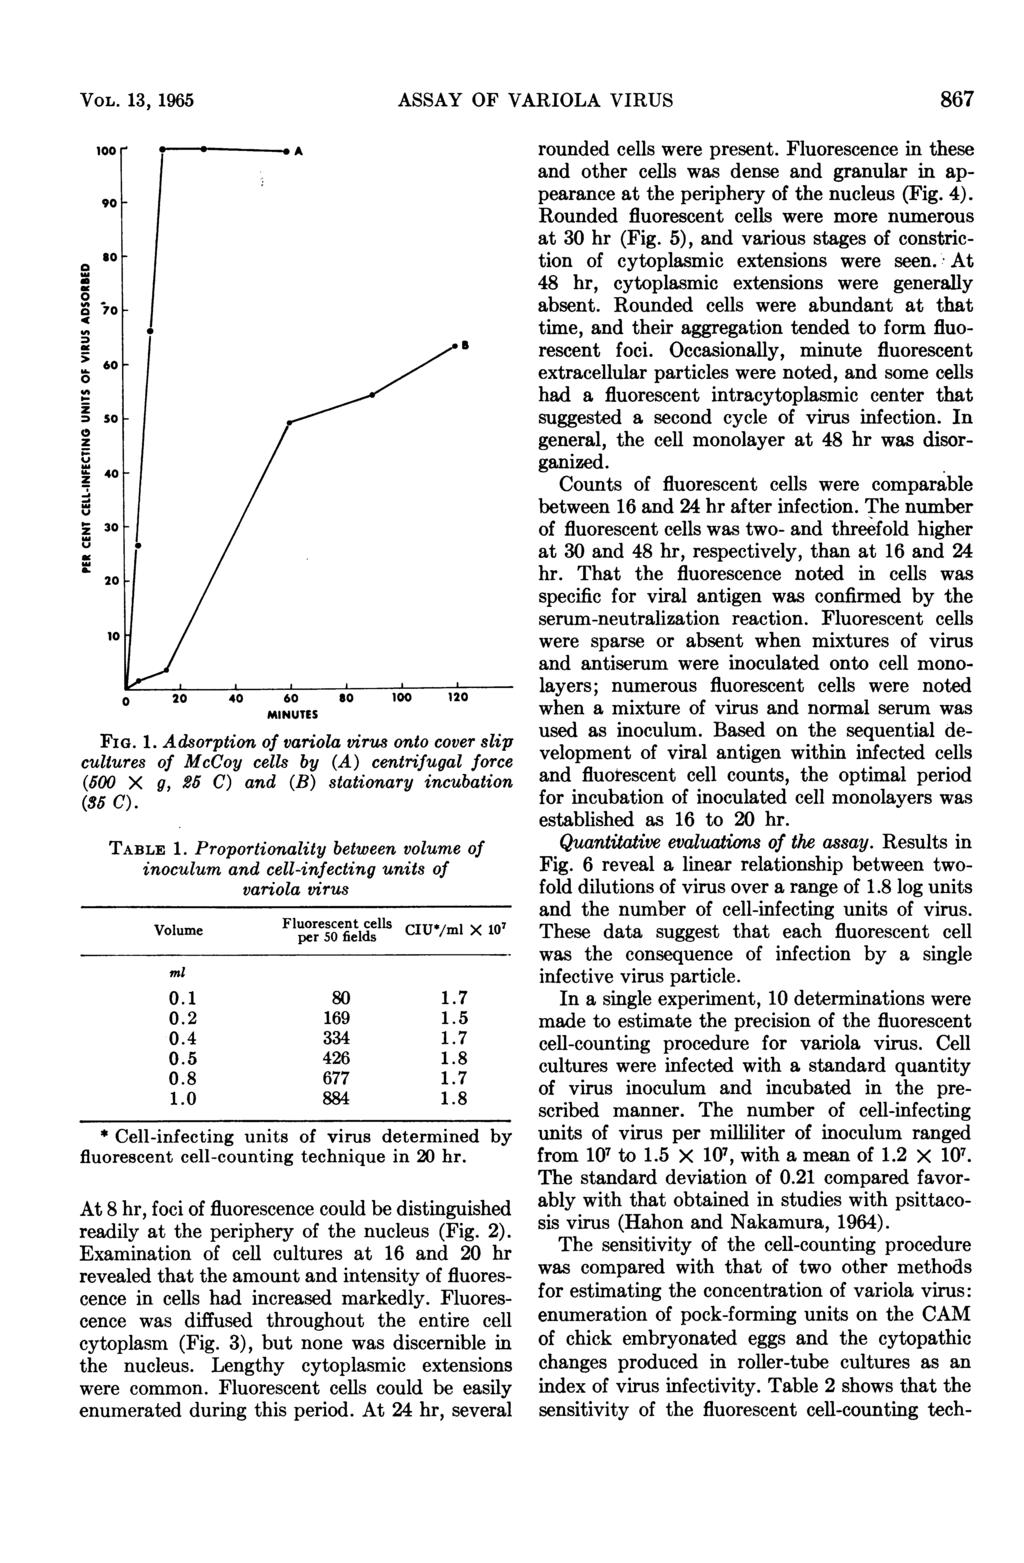 VOL. 13, 1965 ASSAY OF VARIOLA VIRUS 9 so 'o '7 > 6o z z 9- z 3 2 4 6 8 1 12 MINUTES FIG. 1. Adsorption of variola virus onto cover slip cultures of McCoy cells by (A) centrifugal force (5 X g, 25 C) and (B) stationary incubation (35 C).